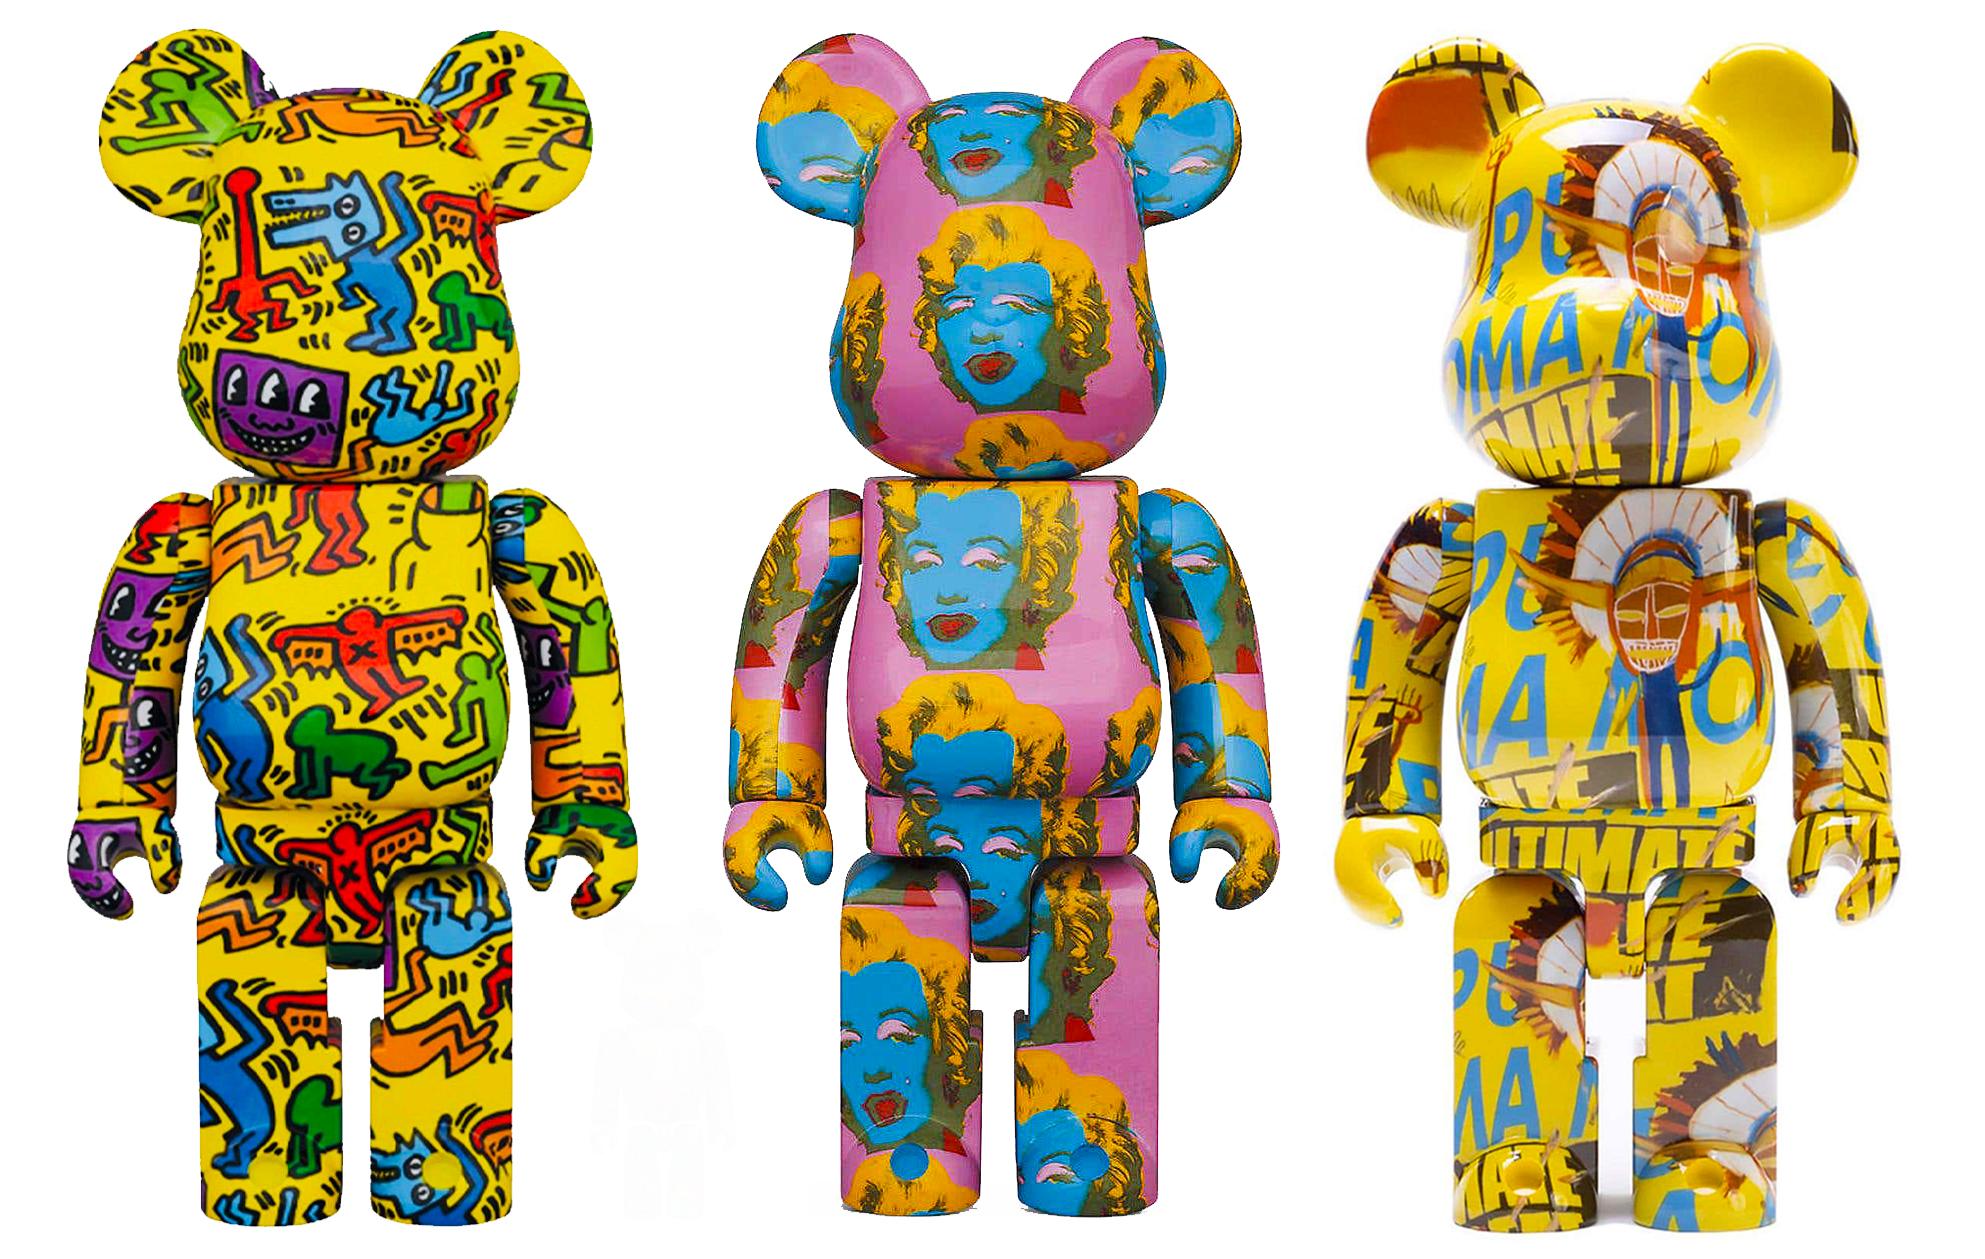 Bearbrick Andy Warhol (The Last Supper) 100% & 400% Set - US